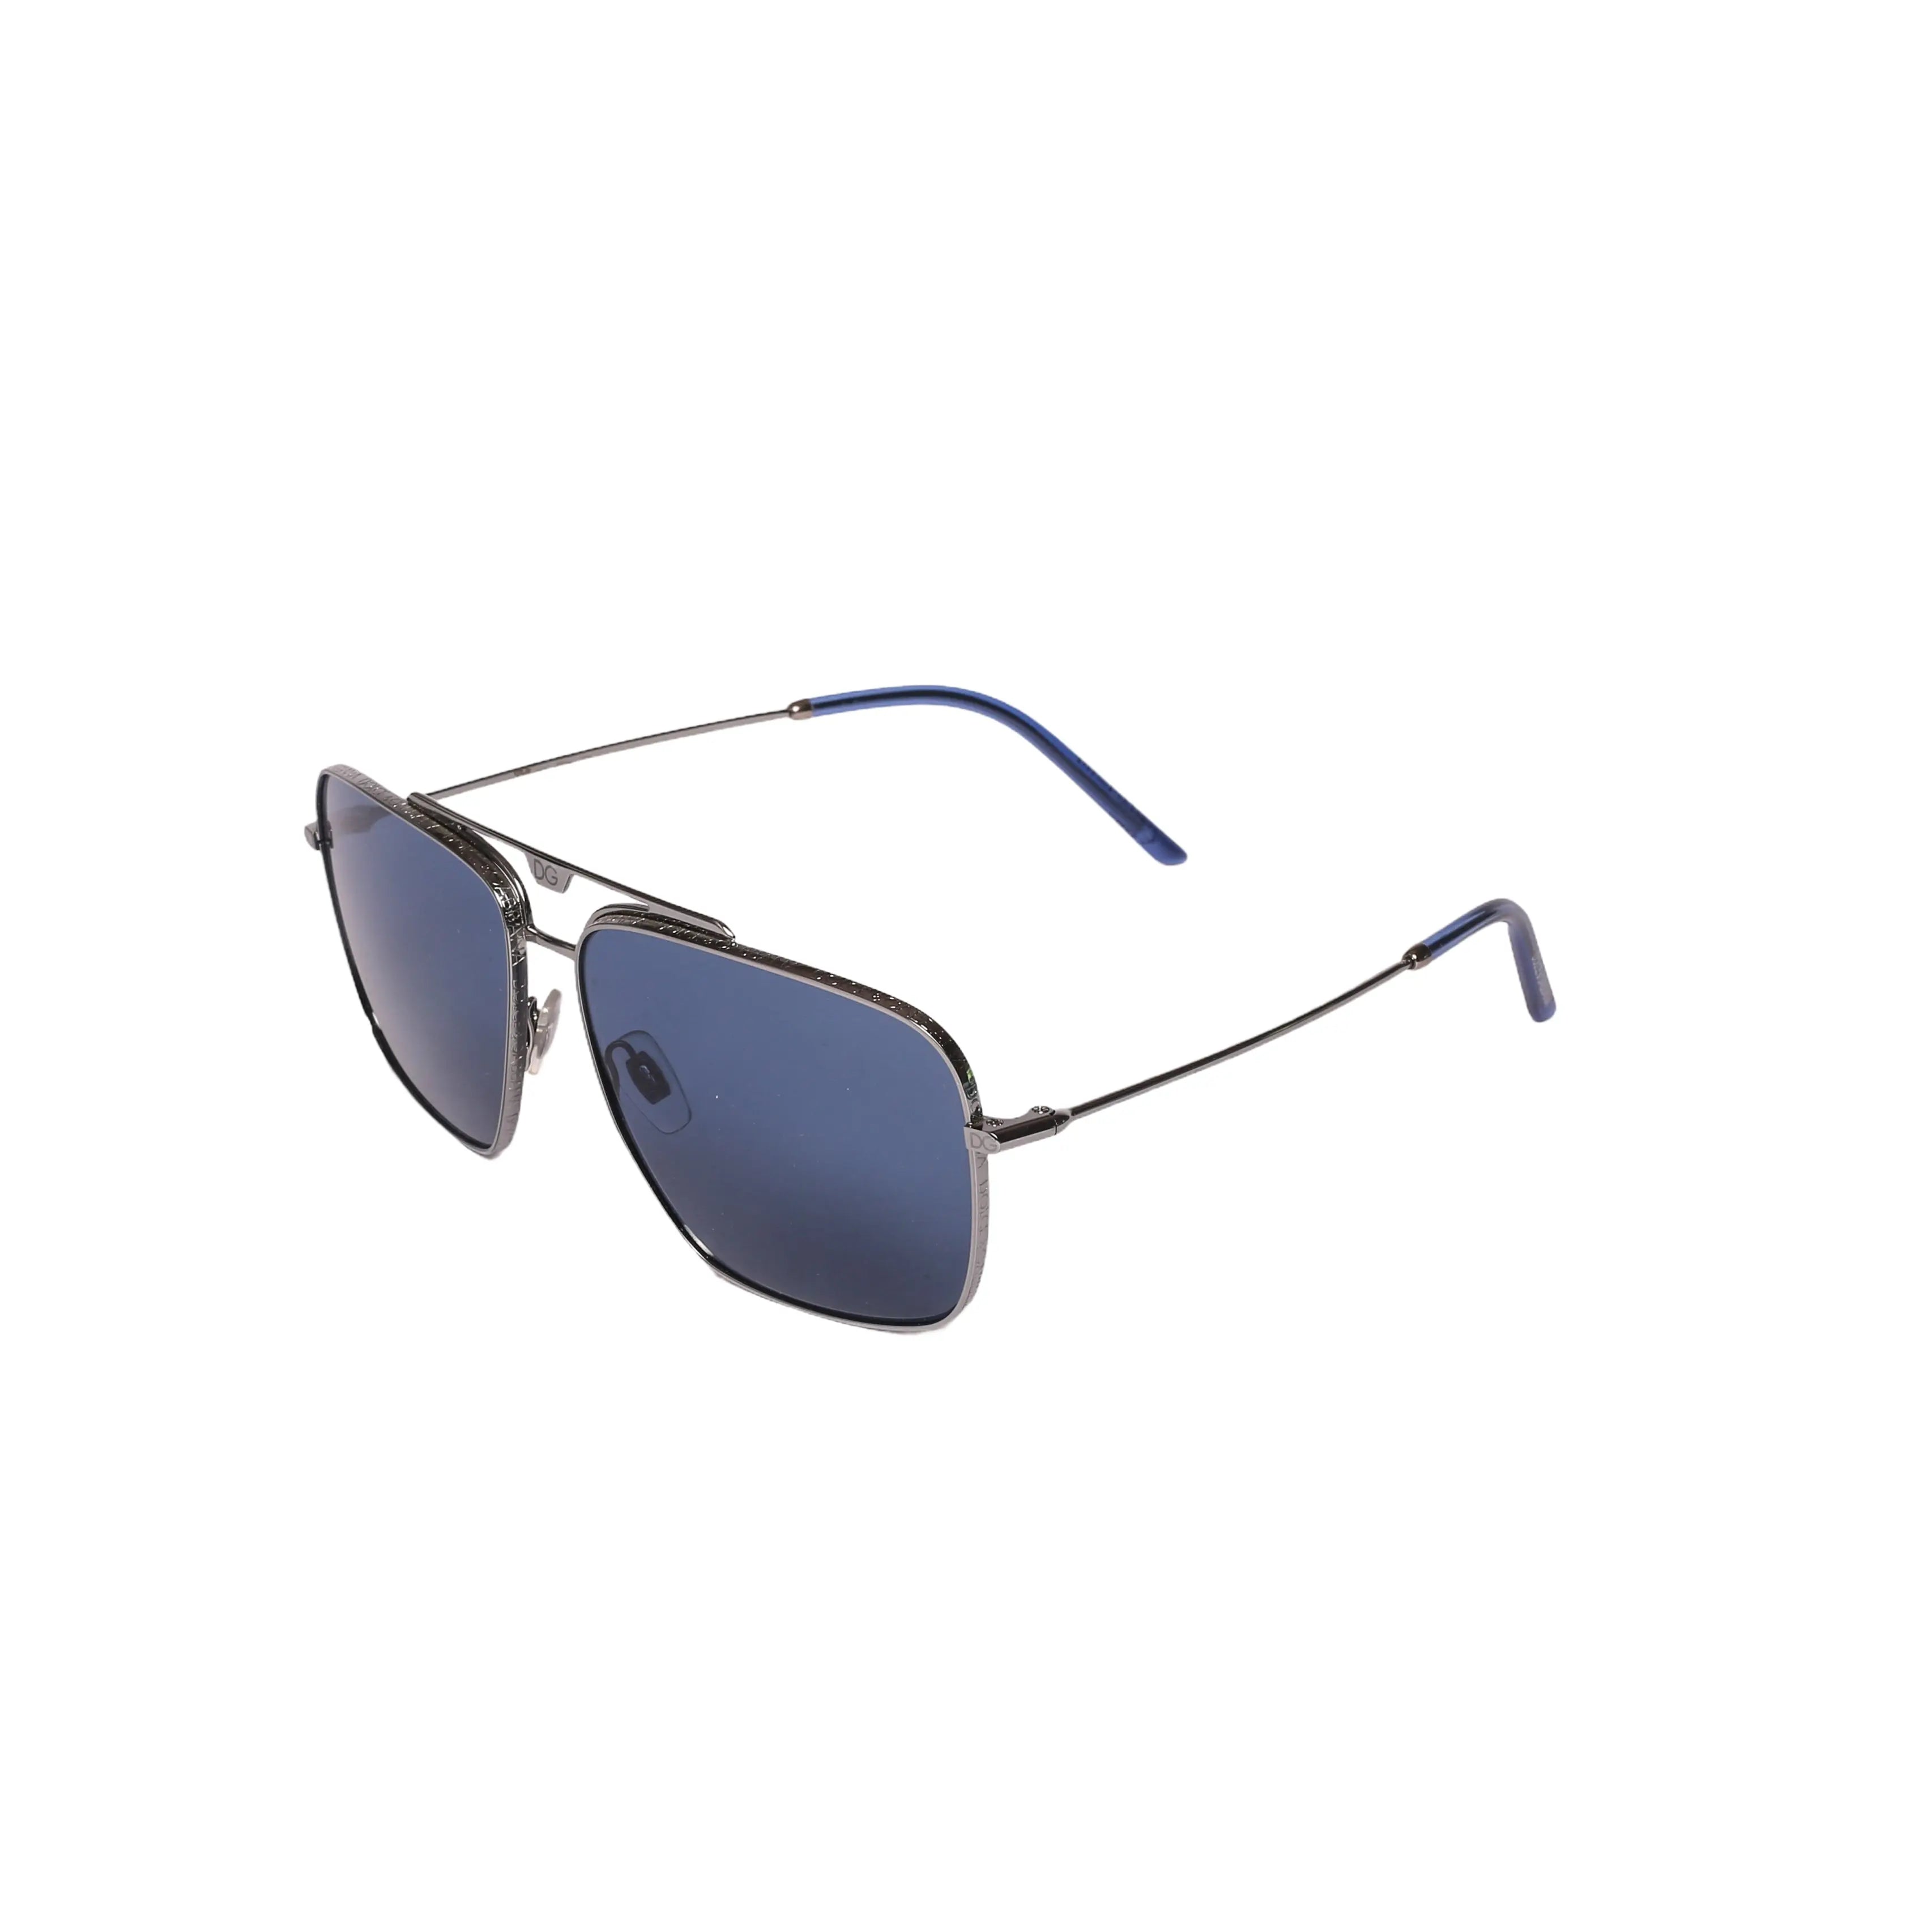 Dolce & Gabbana (D&G) DG 2264-61-04/80 SunglassesFeel your best with the classic style of Dolce &amp; Gabbana (D&amp;G) DG 2264-61-04/80 Sunglasses. These stylish sunglasses feature a classic, timeless look with moSunglasses